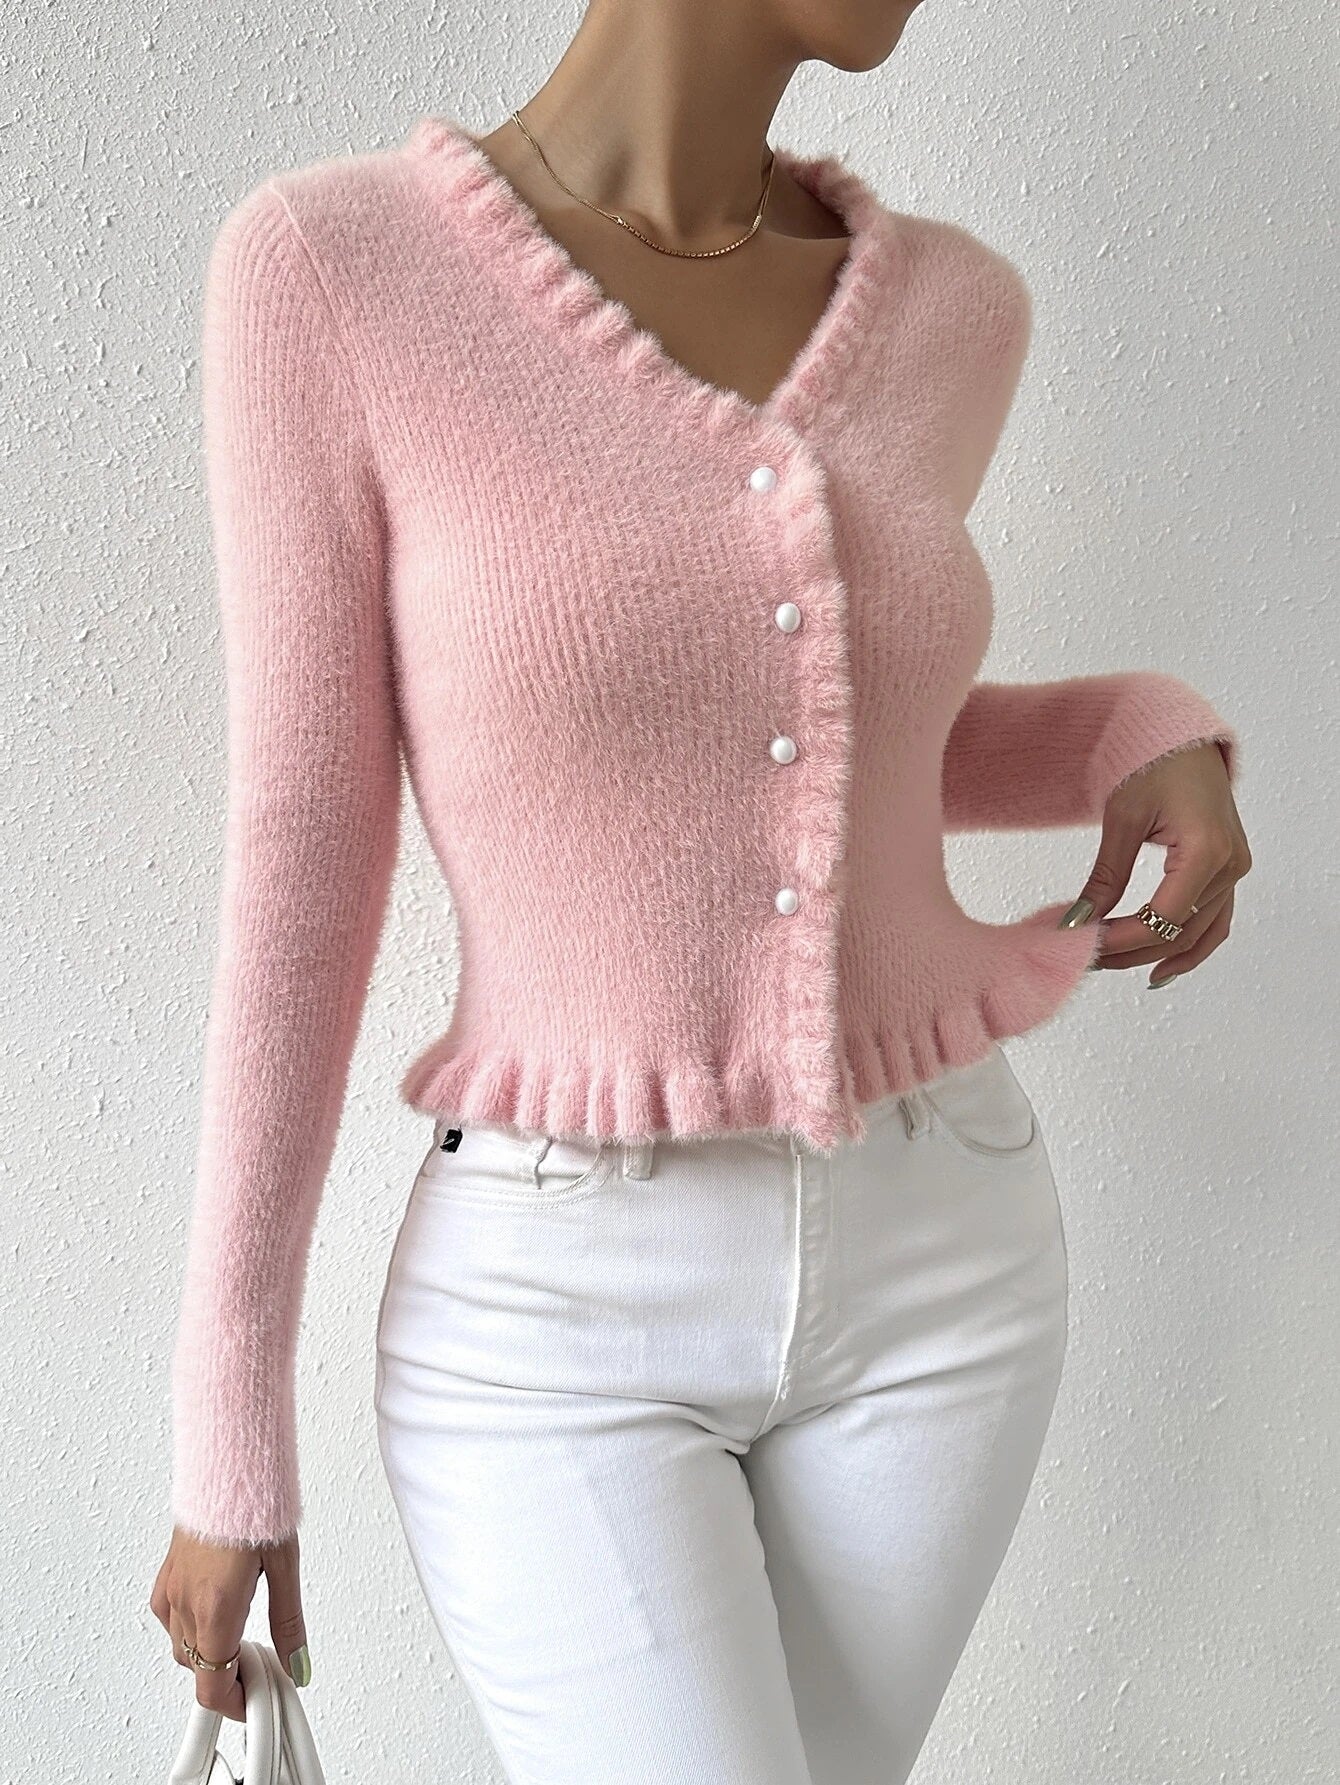 CM-CS713218 Women Casual Seoul Style Frill Trim Open Front Cardigan - Baby Pink